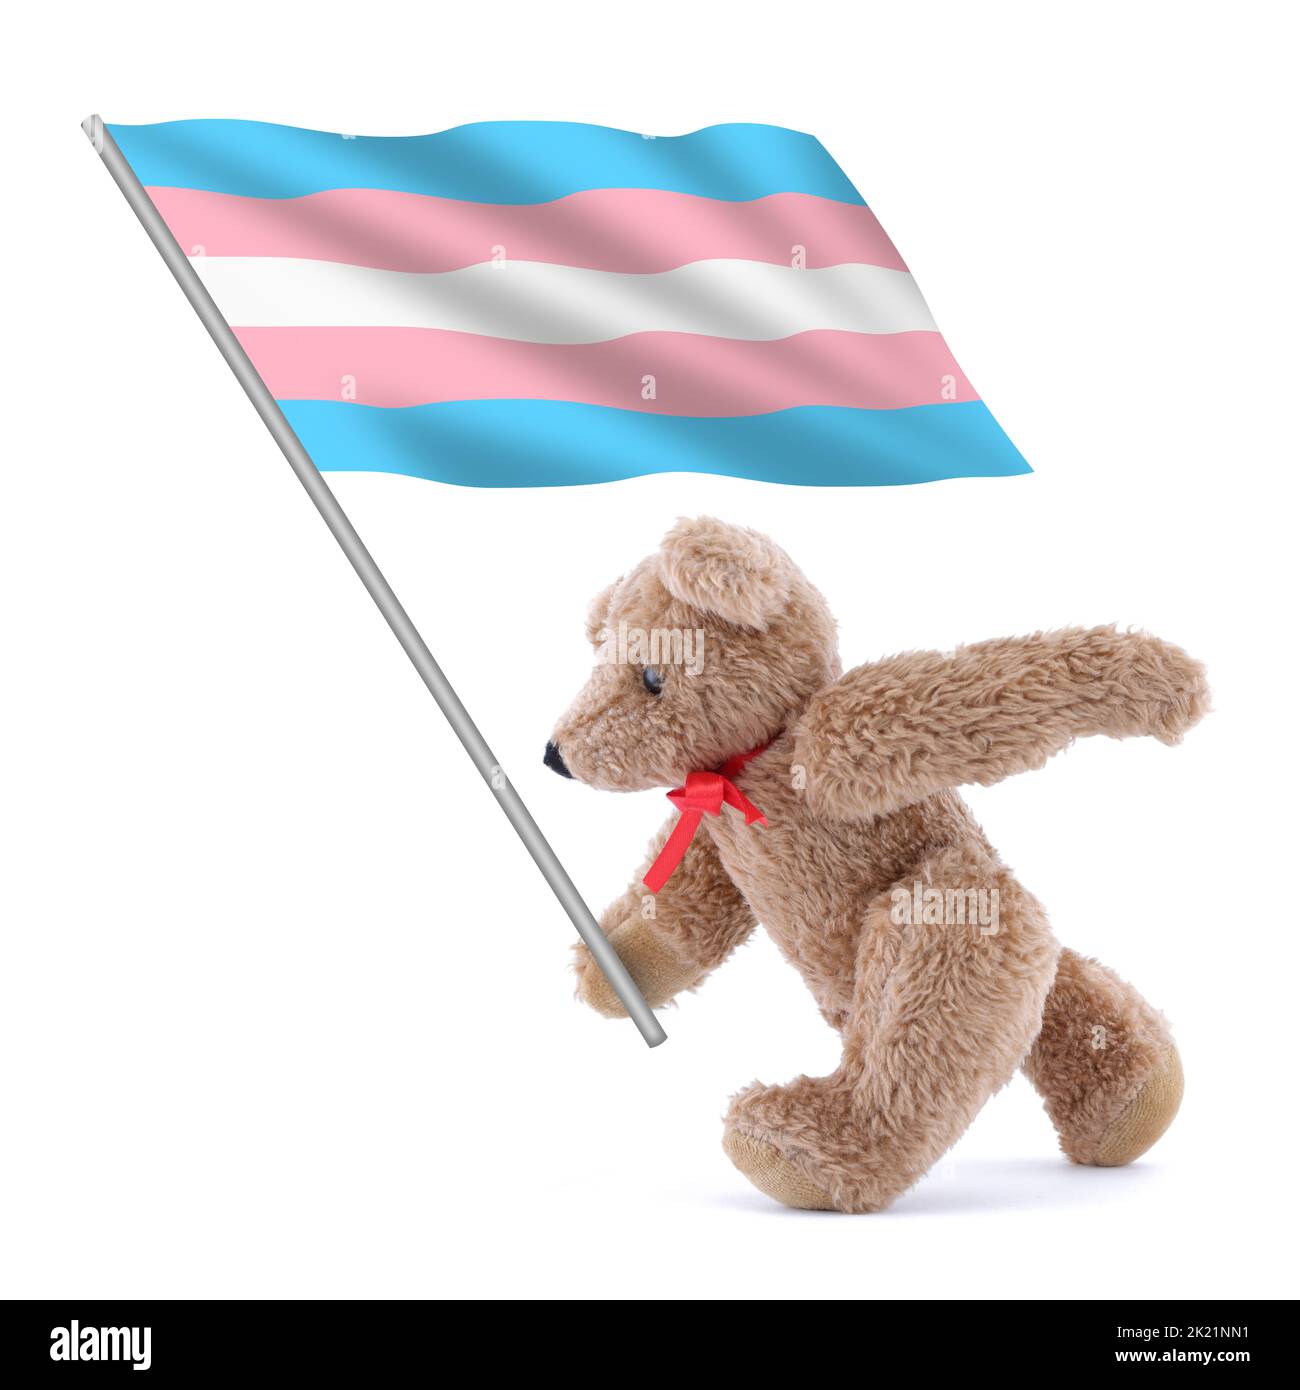 A Transgender flag being carried by a cute teddy bear Stock Photo